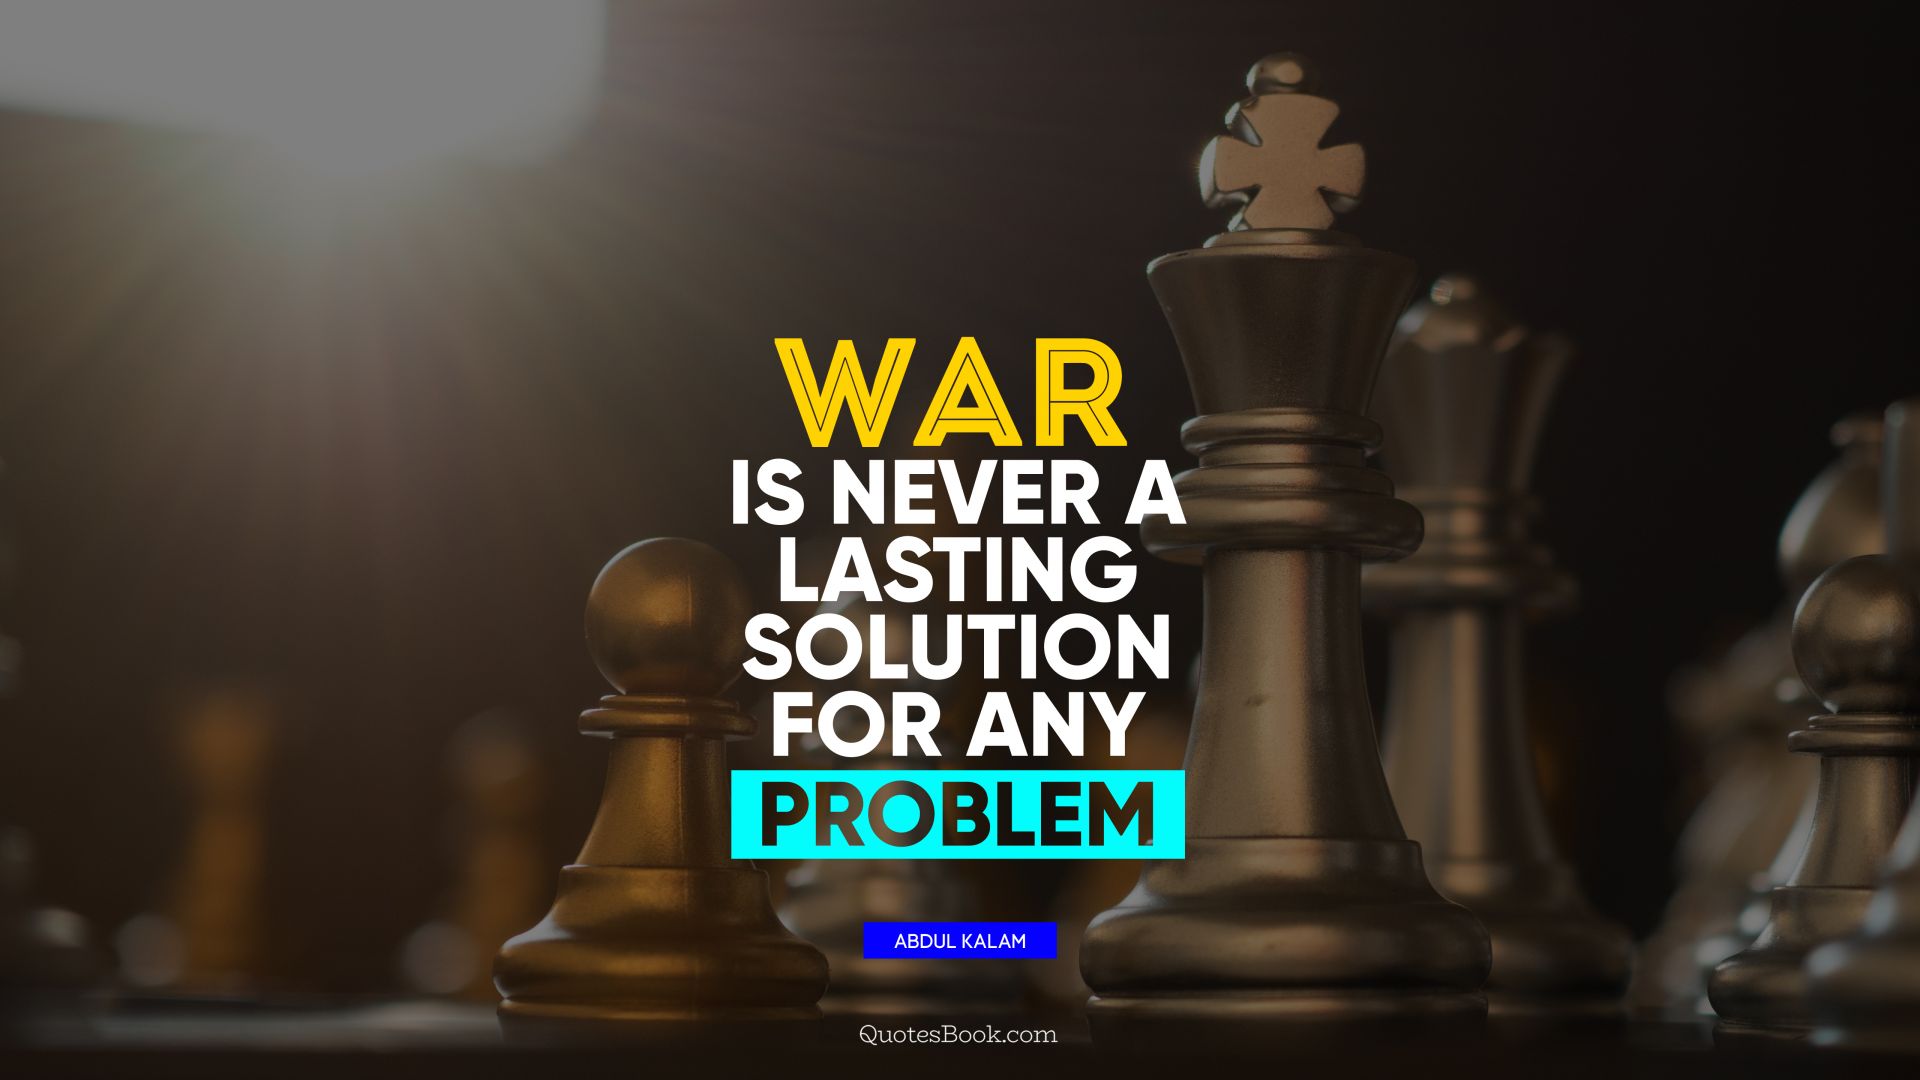 War is never a lasting solution for any problem. - Quote by Abdul Kalam